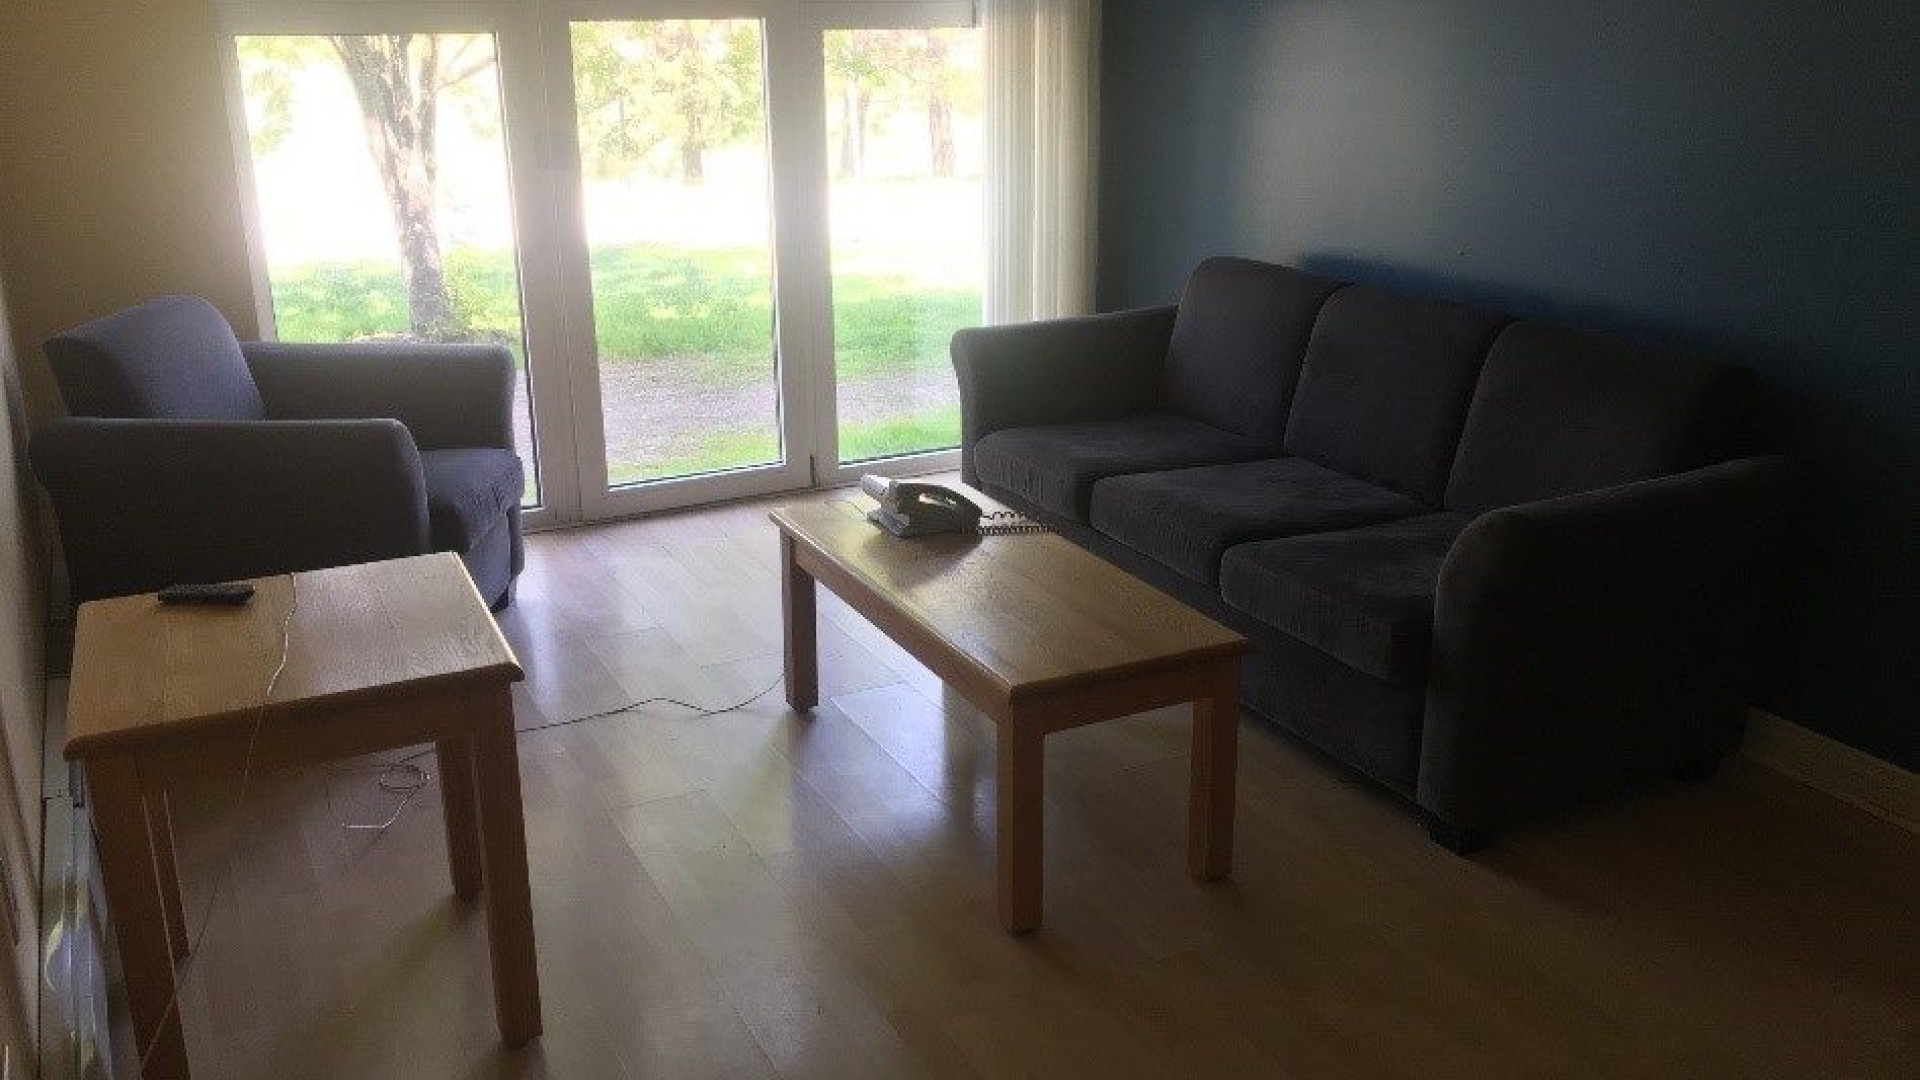 Living room with couches, tables and a window 